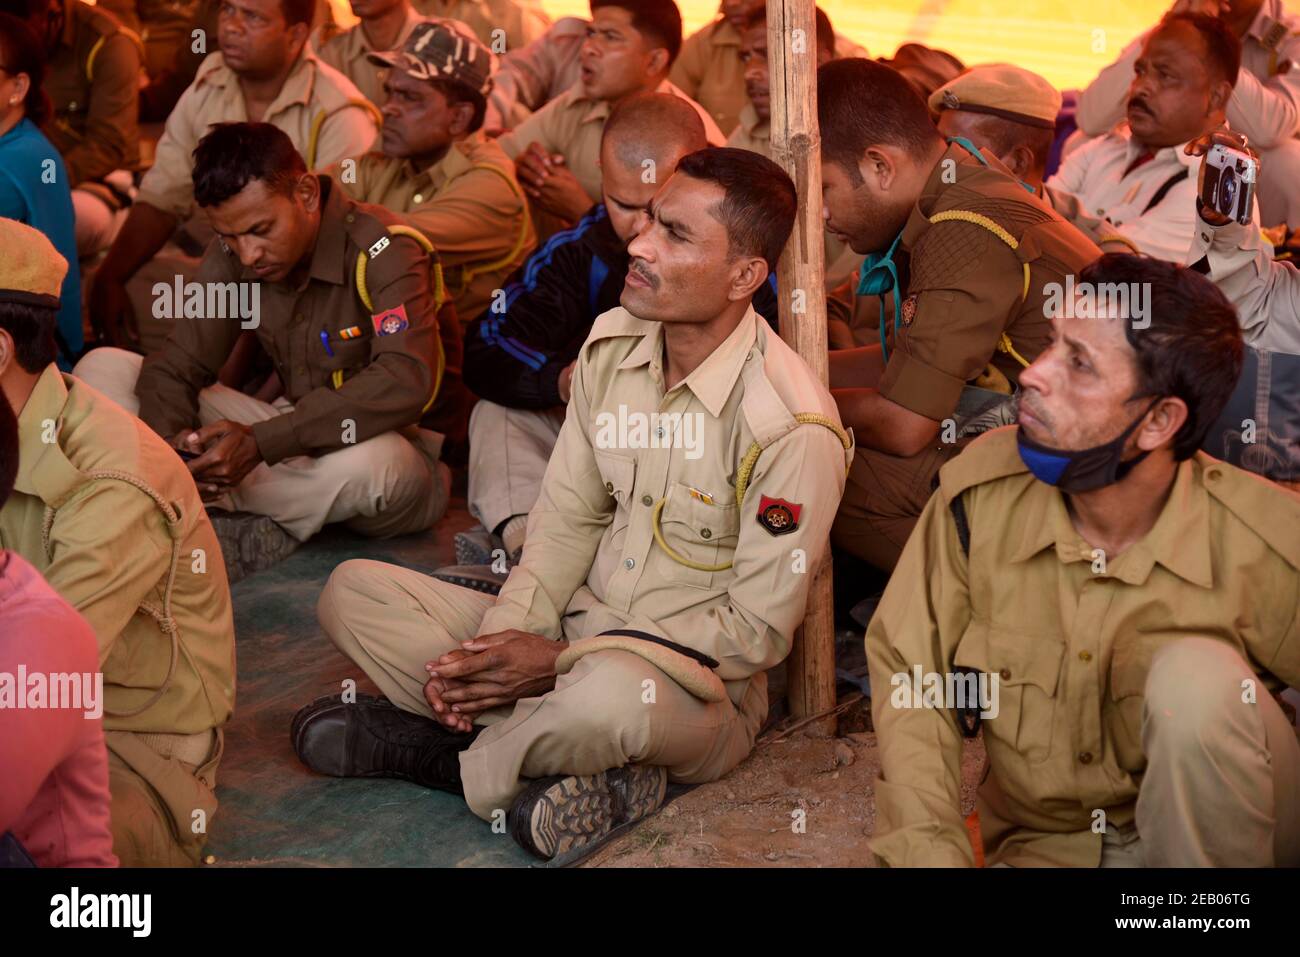 Guwahati, Assam, India. 11th Feb, 2021. All Assam Trained Home Guard Association members during their protest demanding for the regularization of their jobs, at Dispur Last Gate in Guwahati, India on Thursday, Feb. 11, 2021. Credit: David Talukdar/ZUMA Wire/Alamy Live News Stock Photo